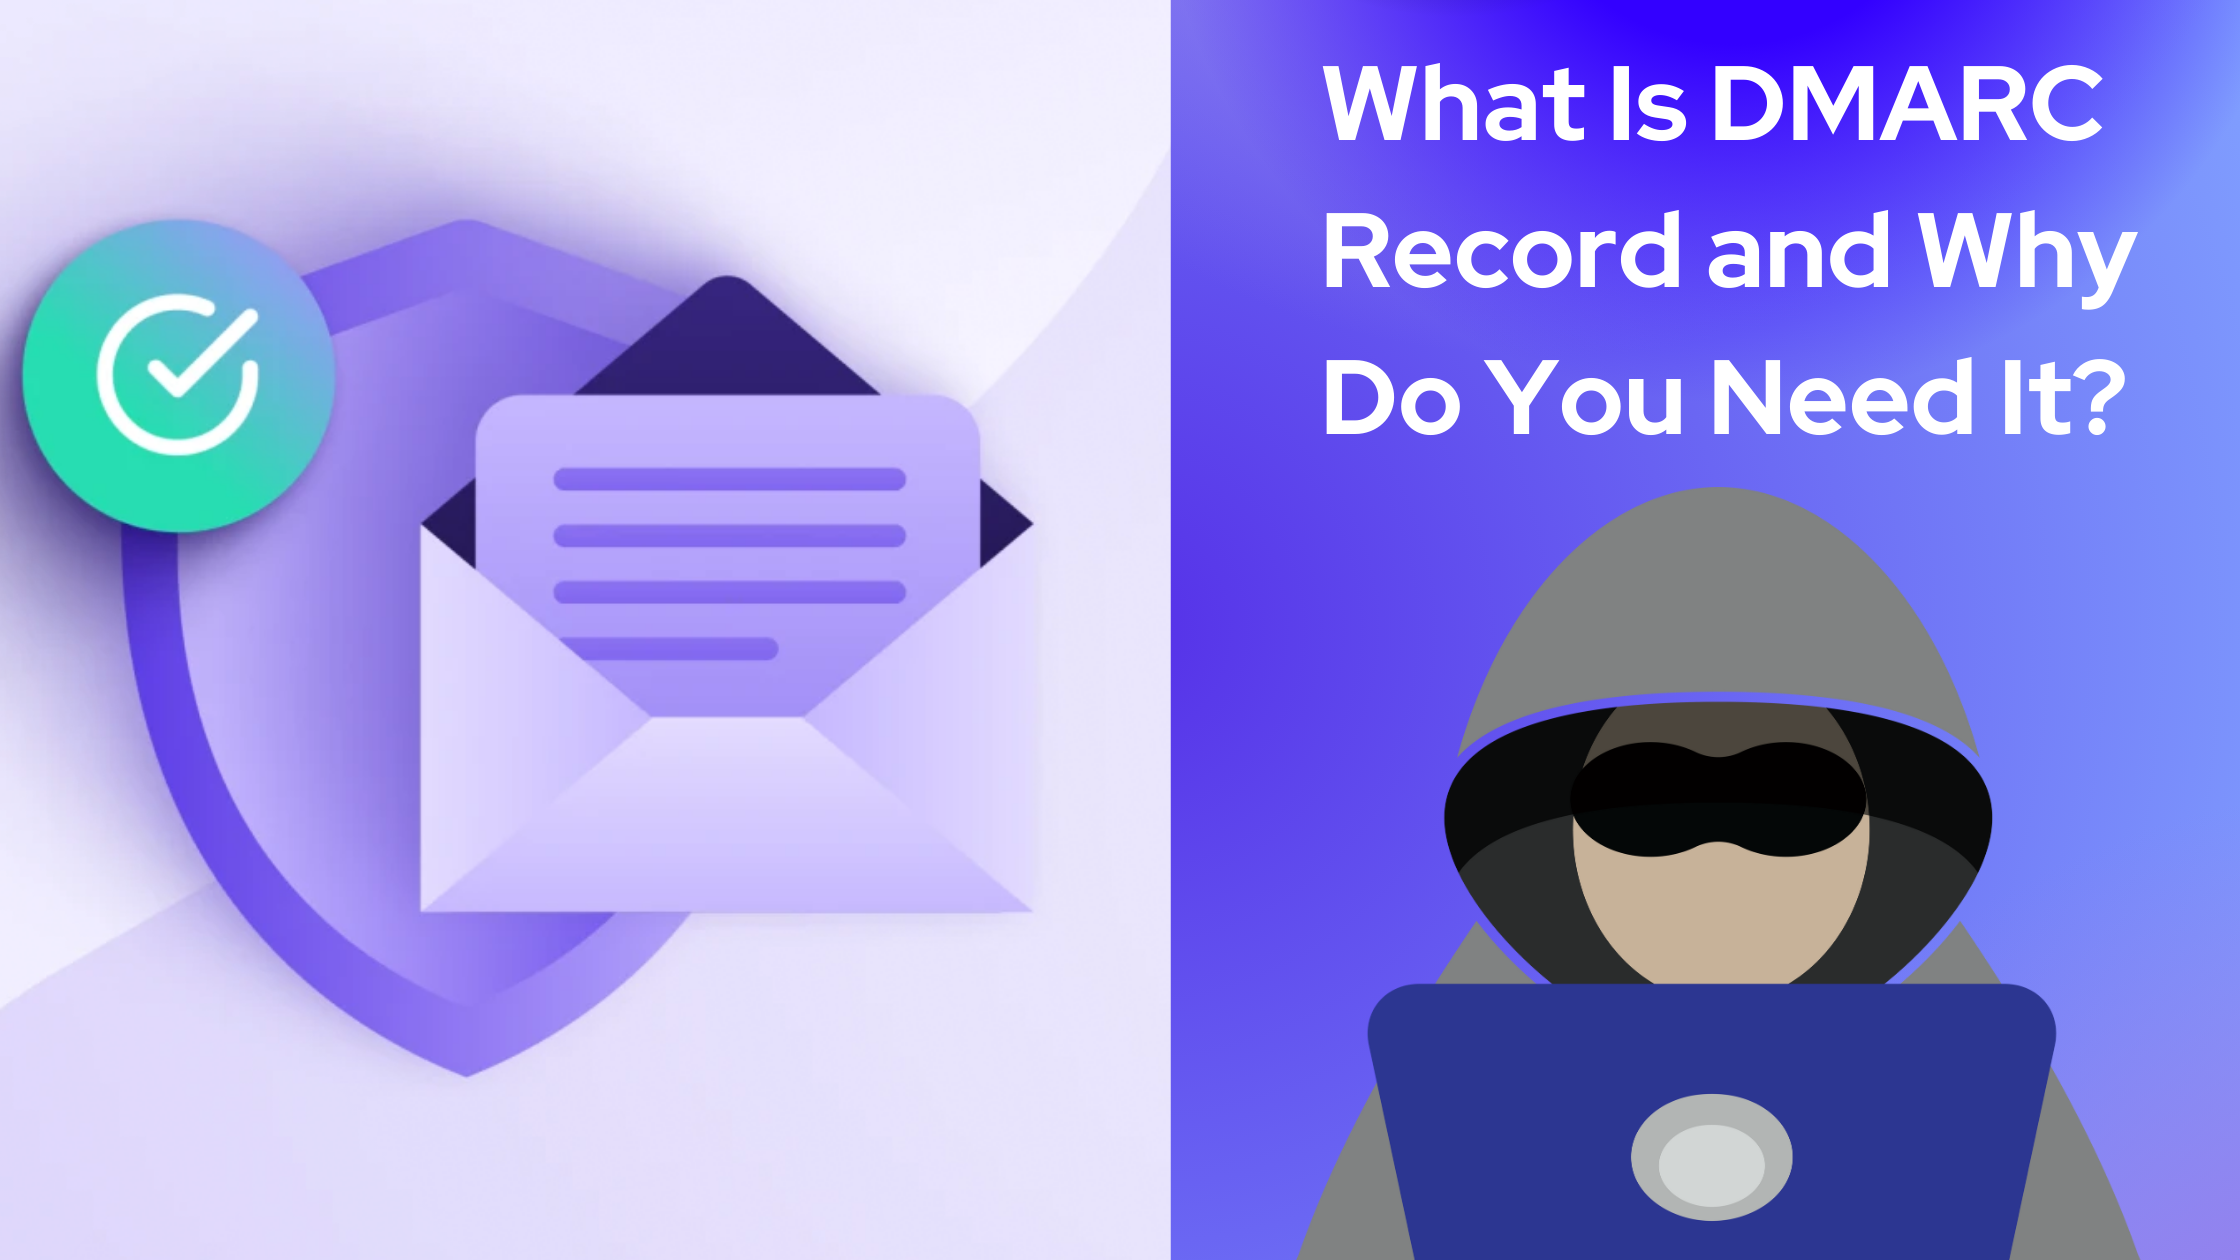 What Is DMARC Record and Why Do You Need It?